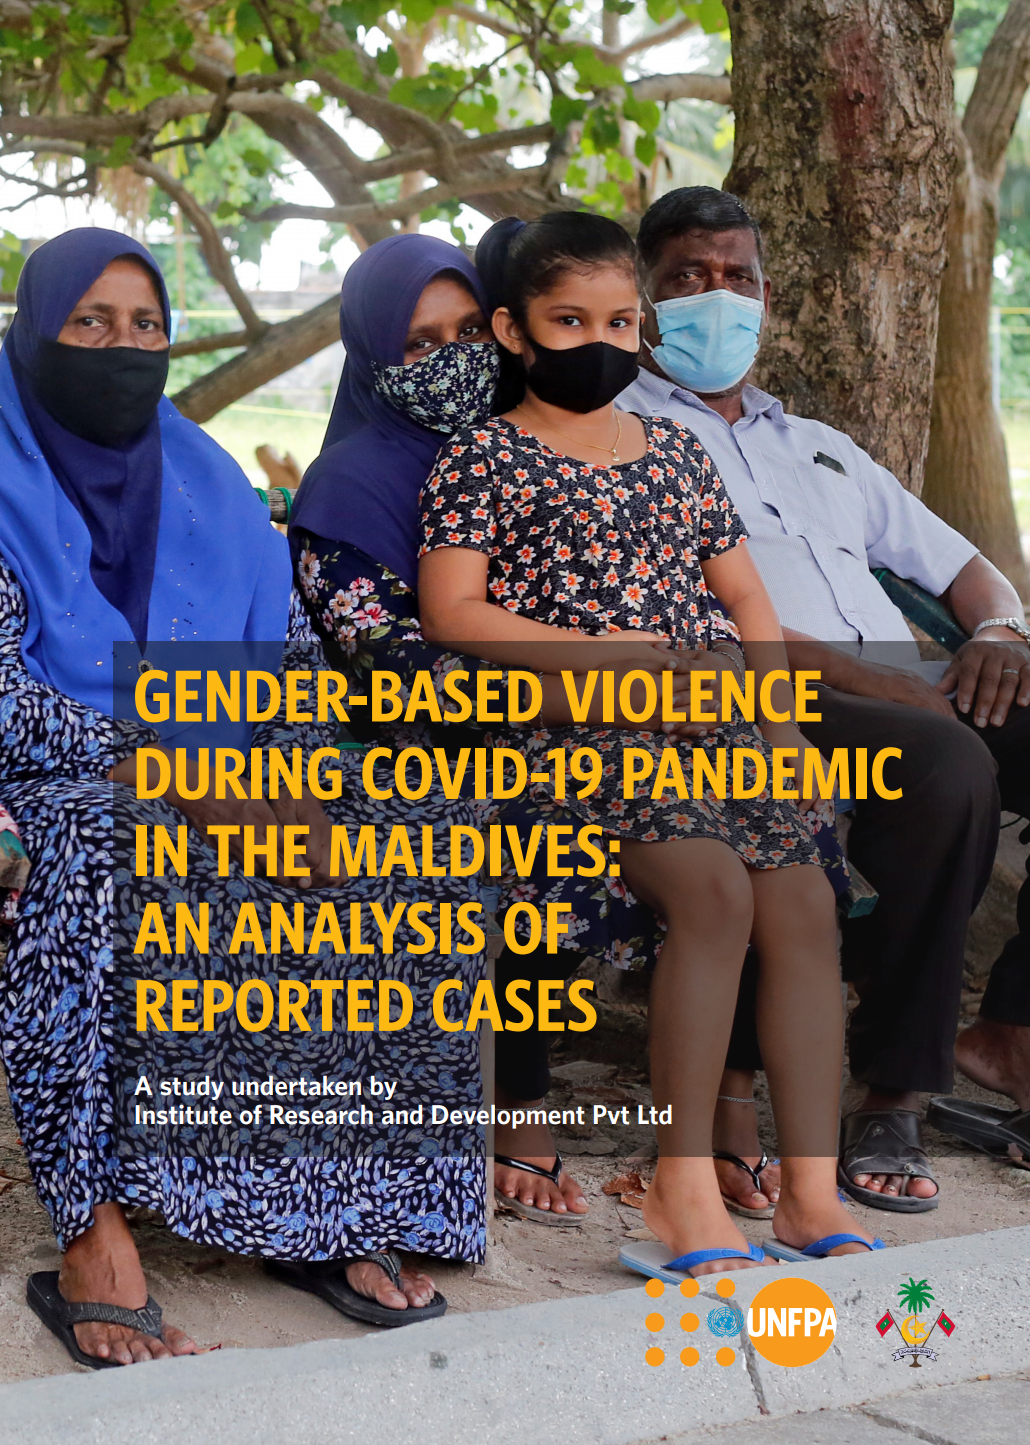 Gender-Based Violence during Covid-19 Pandemic in the Maldives: An Analysis of Reported Cases 